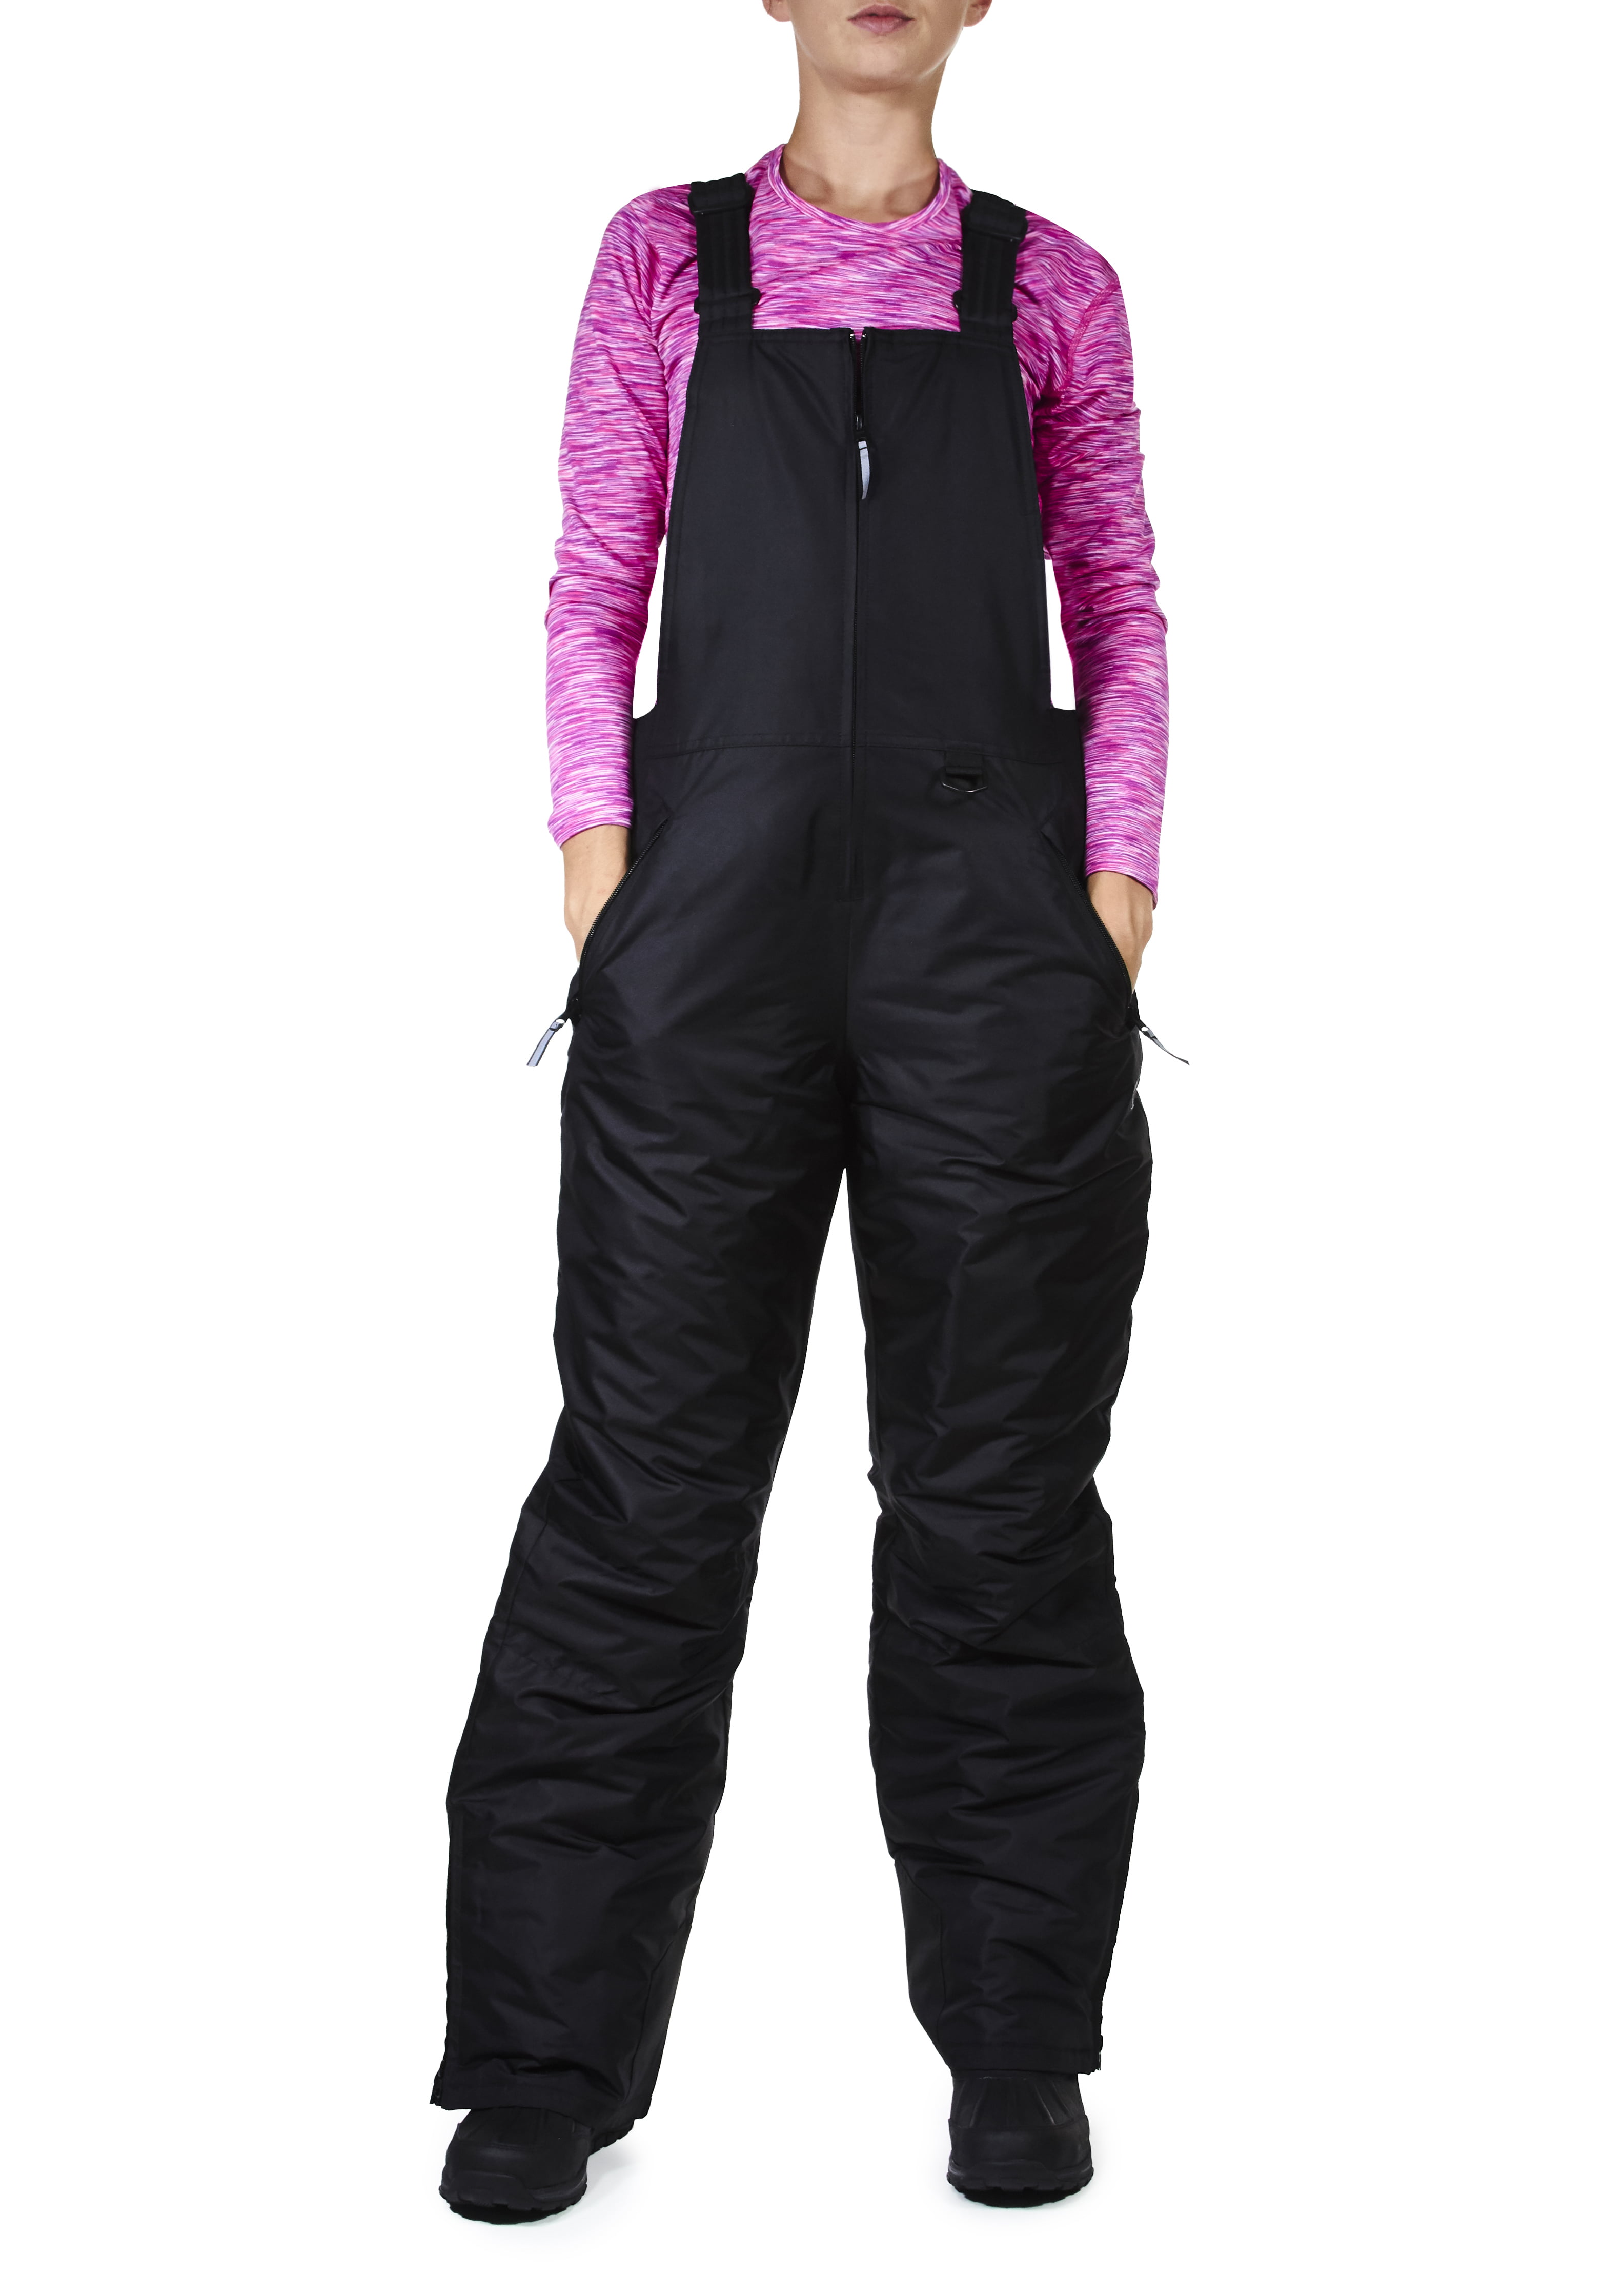 Arctic Quest Women's Water Resistant Insulated Ski and Snow Bib 